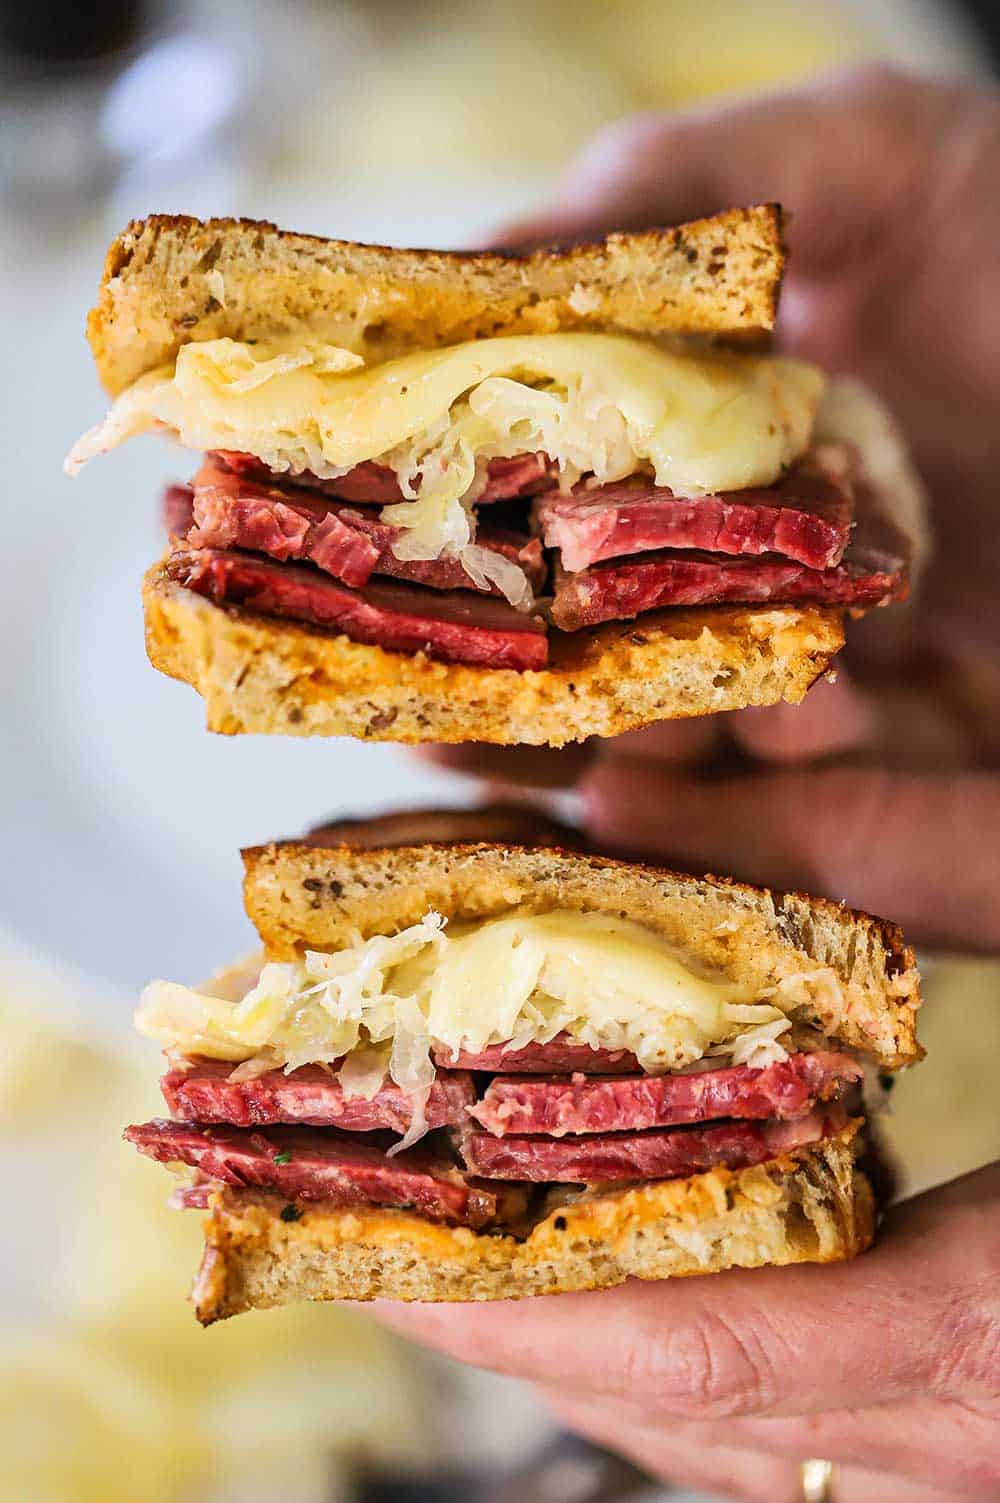 Two hands holding two halves of a grilled rueben sandwich exposing the thick cut corned beef, sauerkraut, and and melty Swiss cheese.